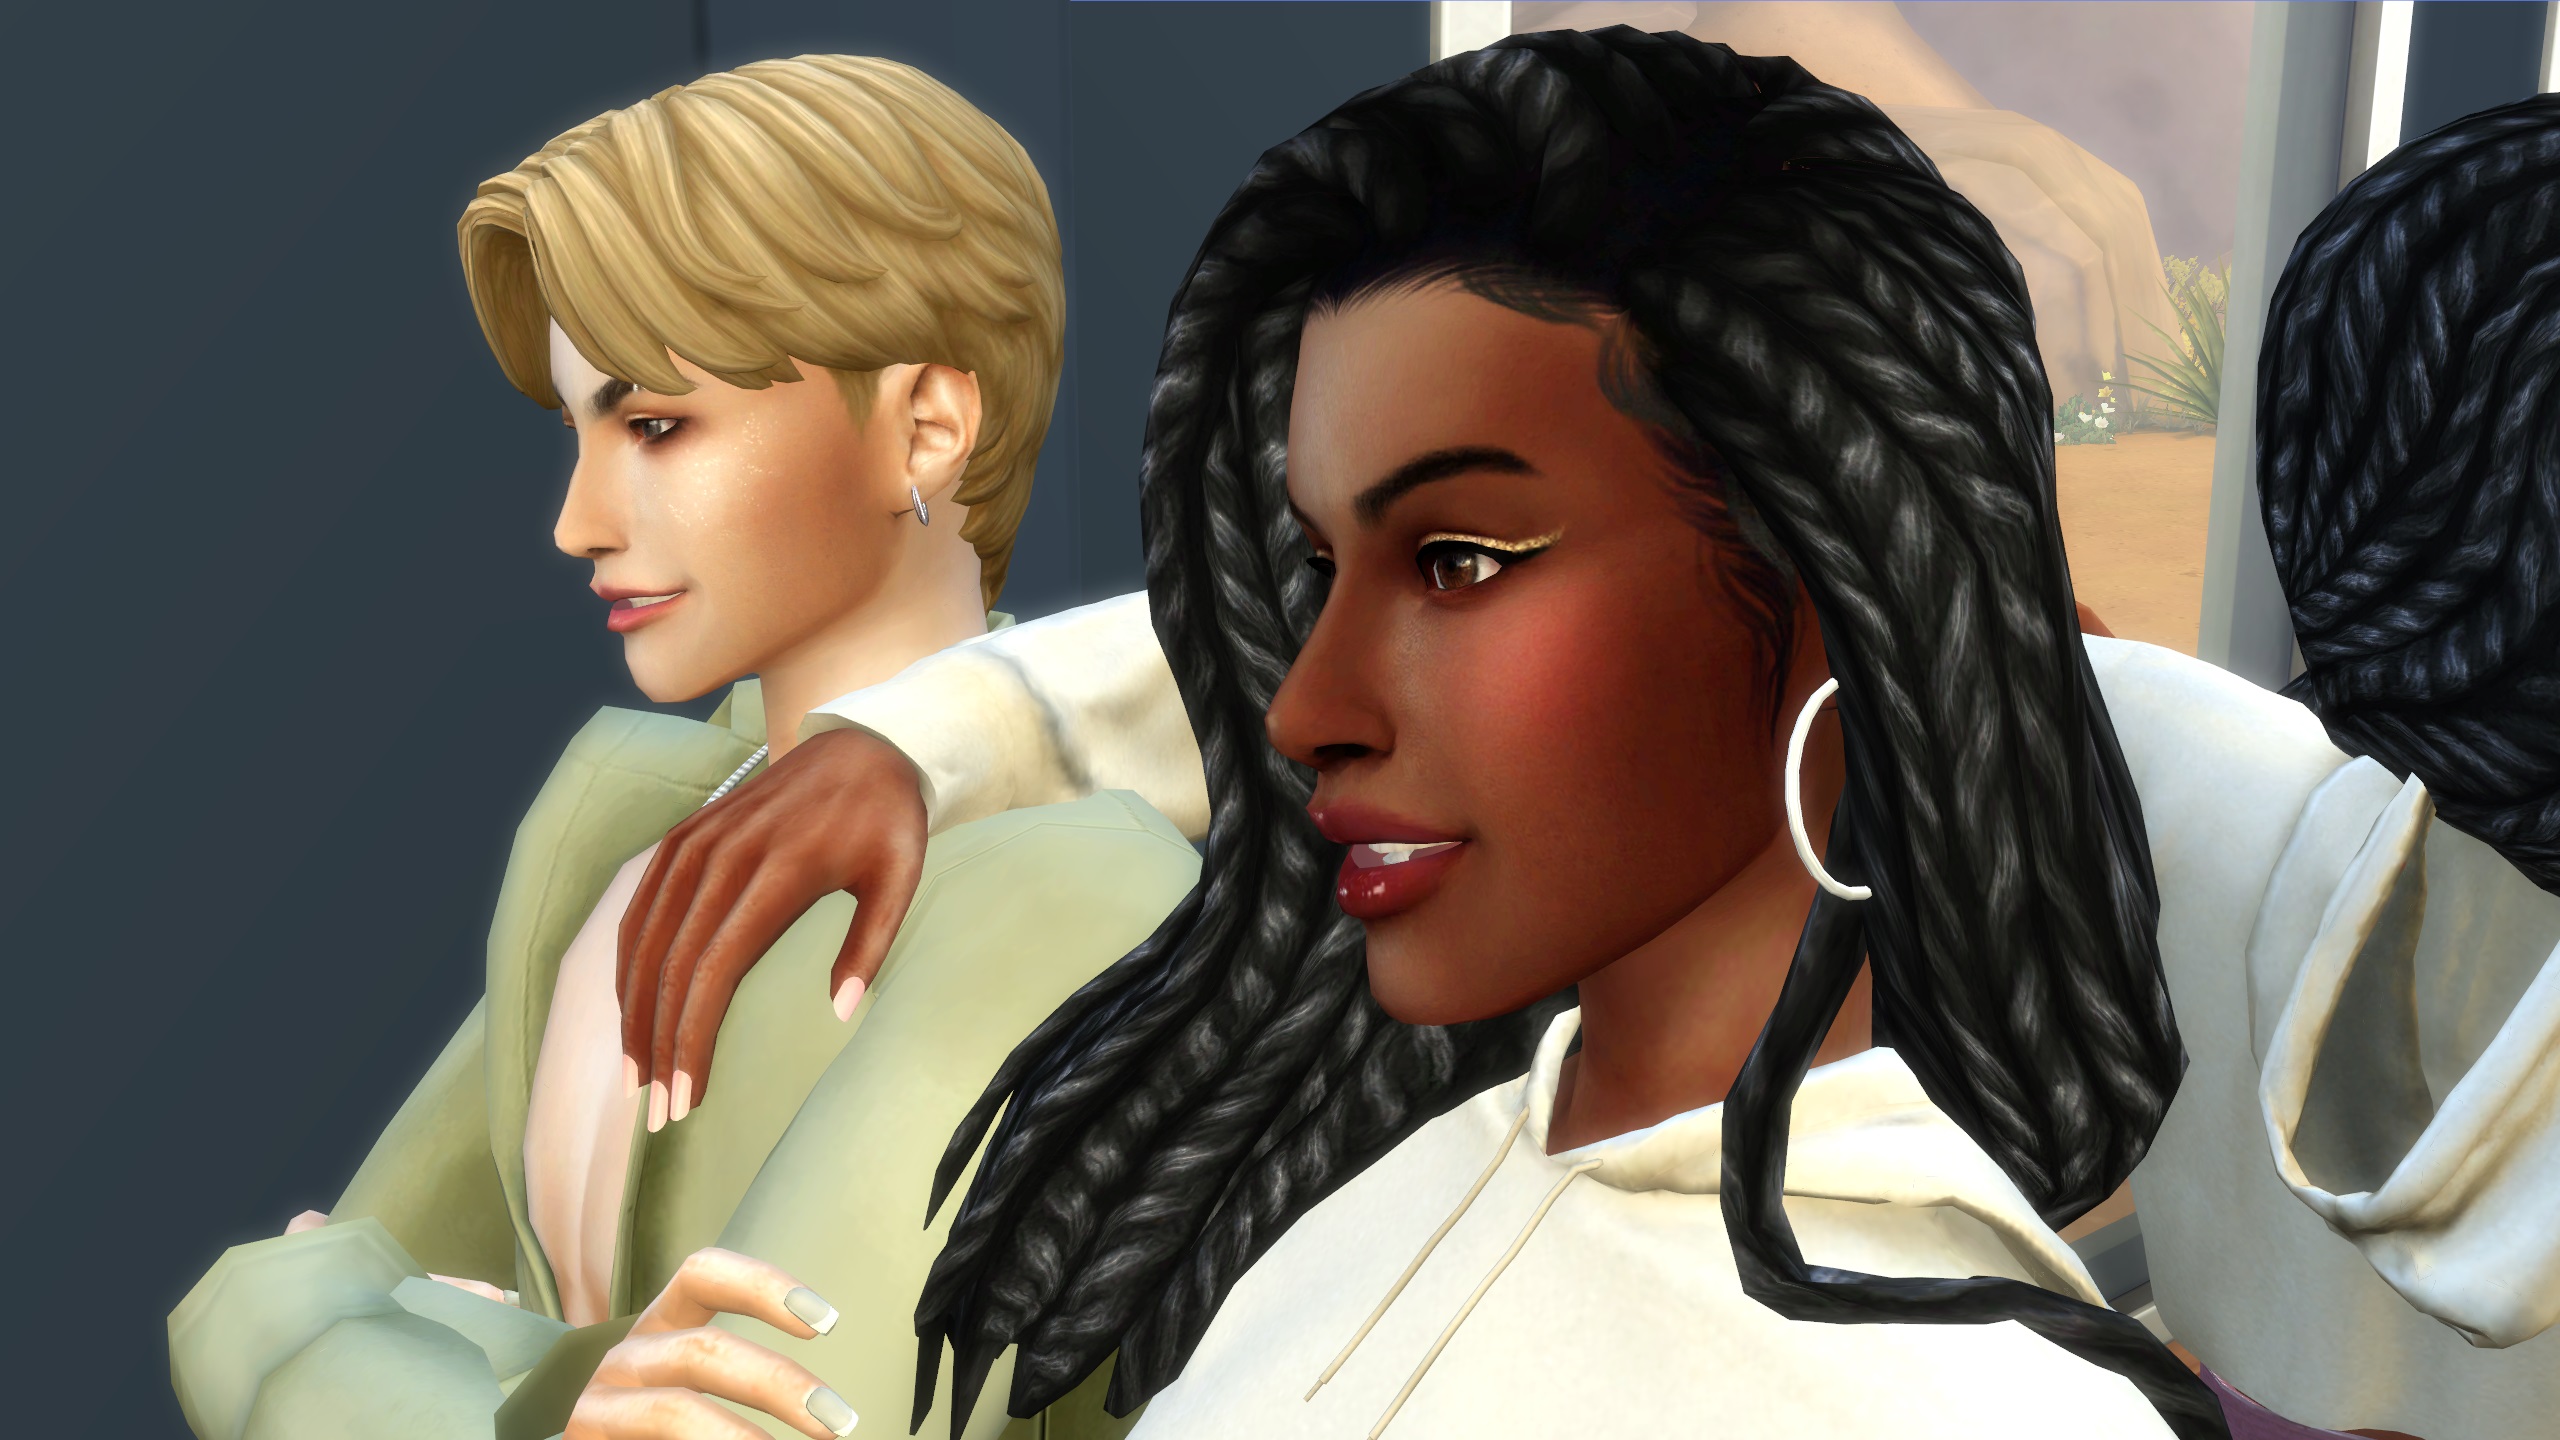 The Sims 4 CC - Two modded Sims dressed in makeup, glitter, eyeliner, with modded braid hairstyles and modded men's hairstyles.